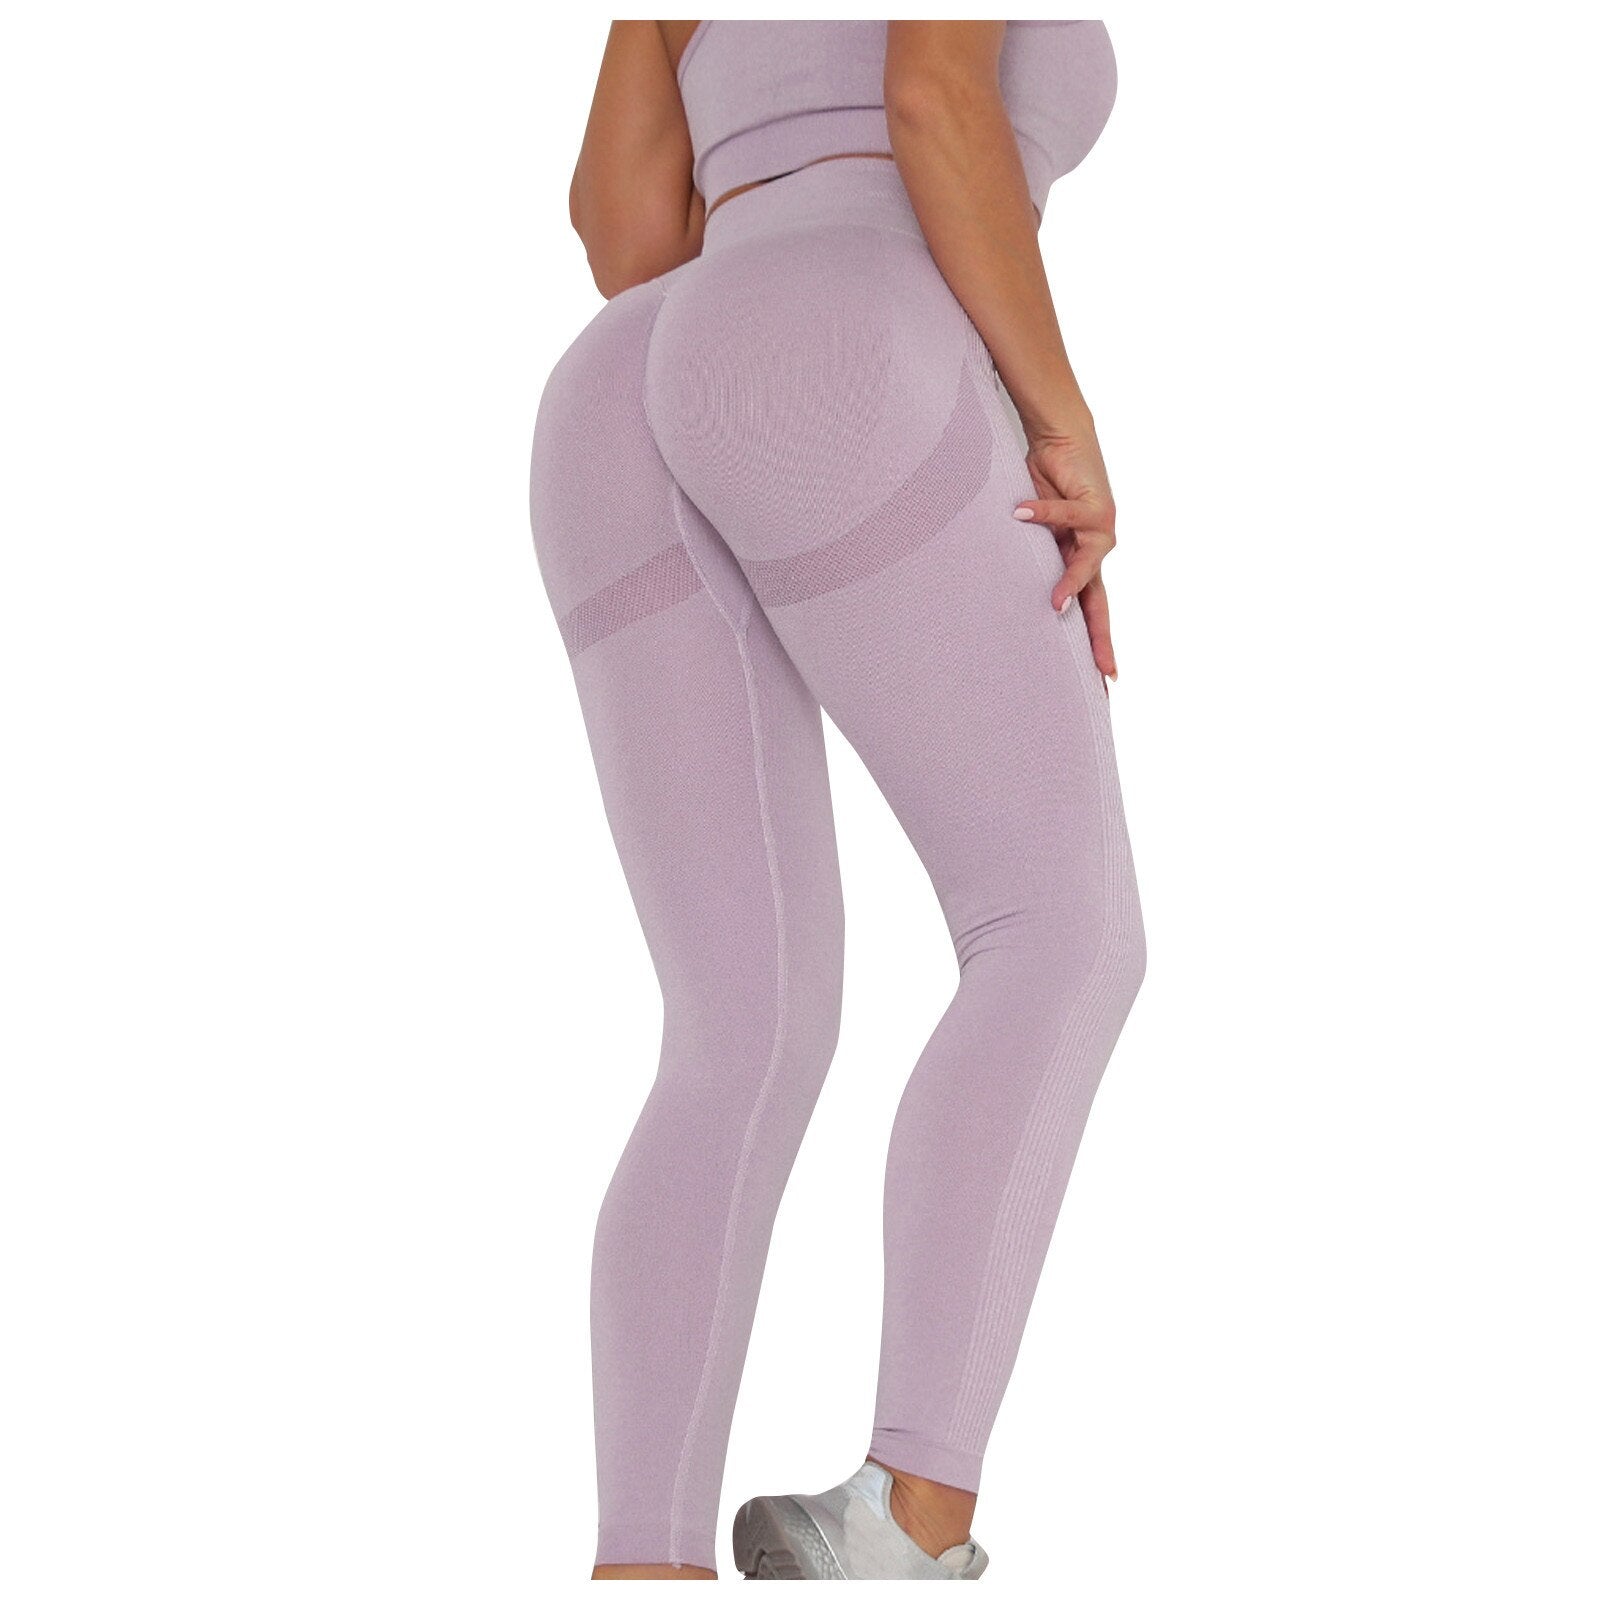 Women's Training Compression Tights